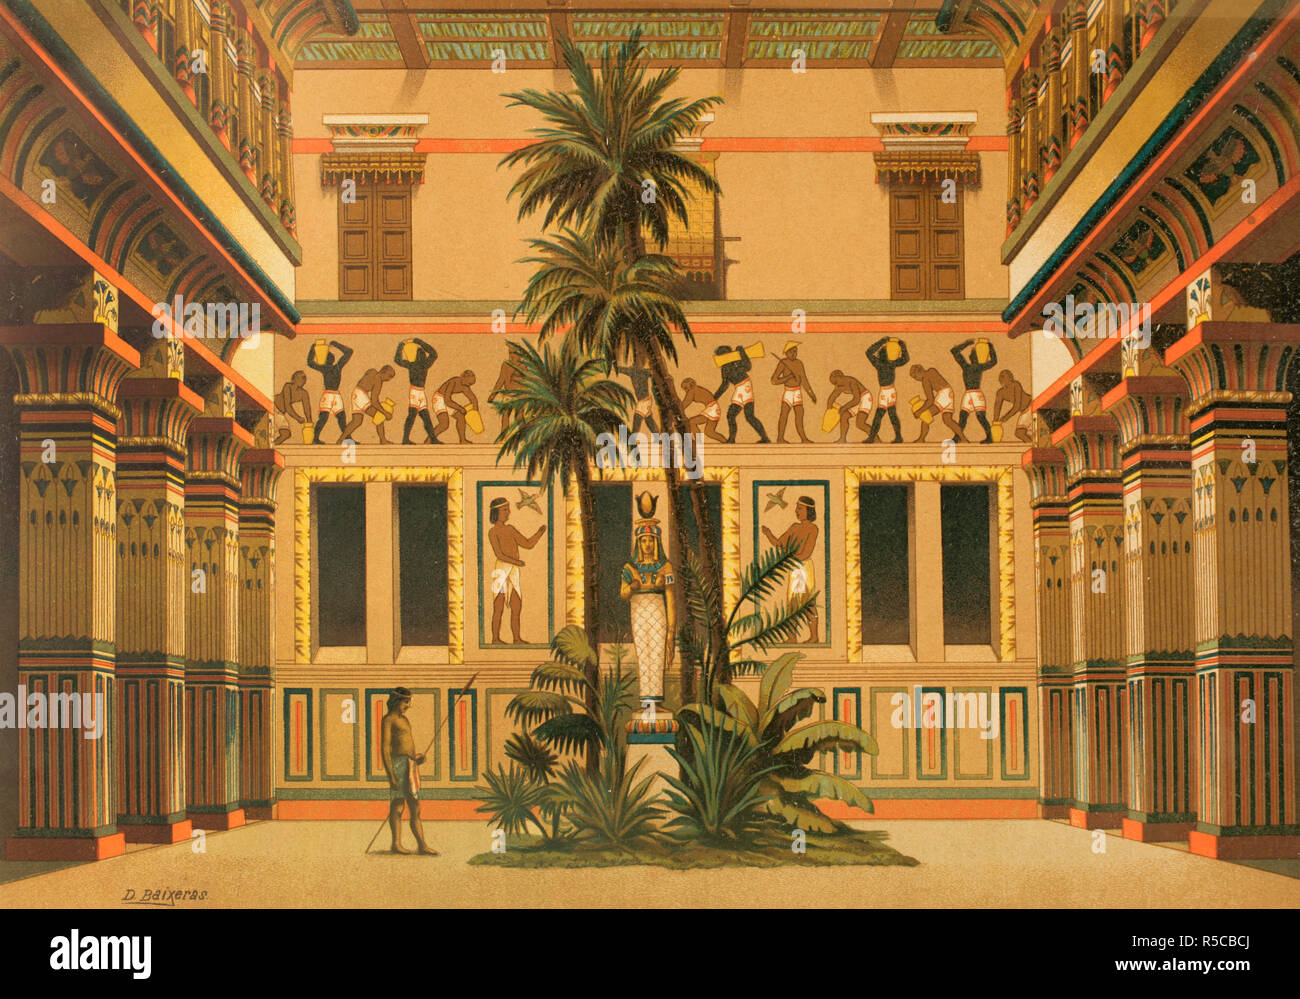 North of Africa. Ancient Egypt. Courtyard of a residence of the Egyptian nobility. Drawing by Dionisio Baixeras (1862-1943). Chromolithography. La Civilizacion (The Civilization), volume I, 1881. Stock Photo